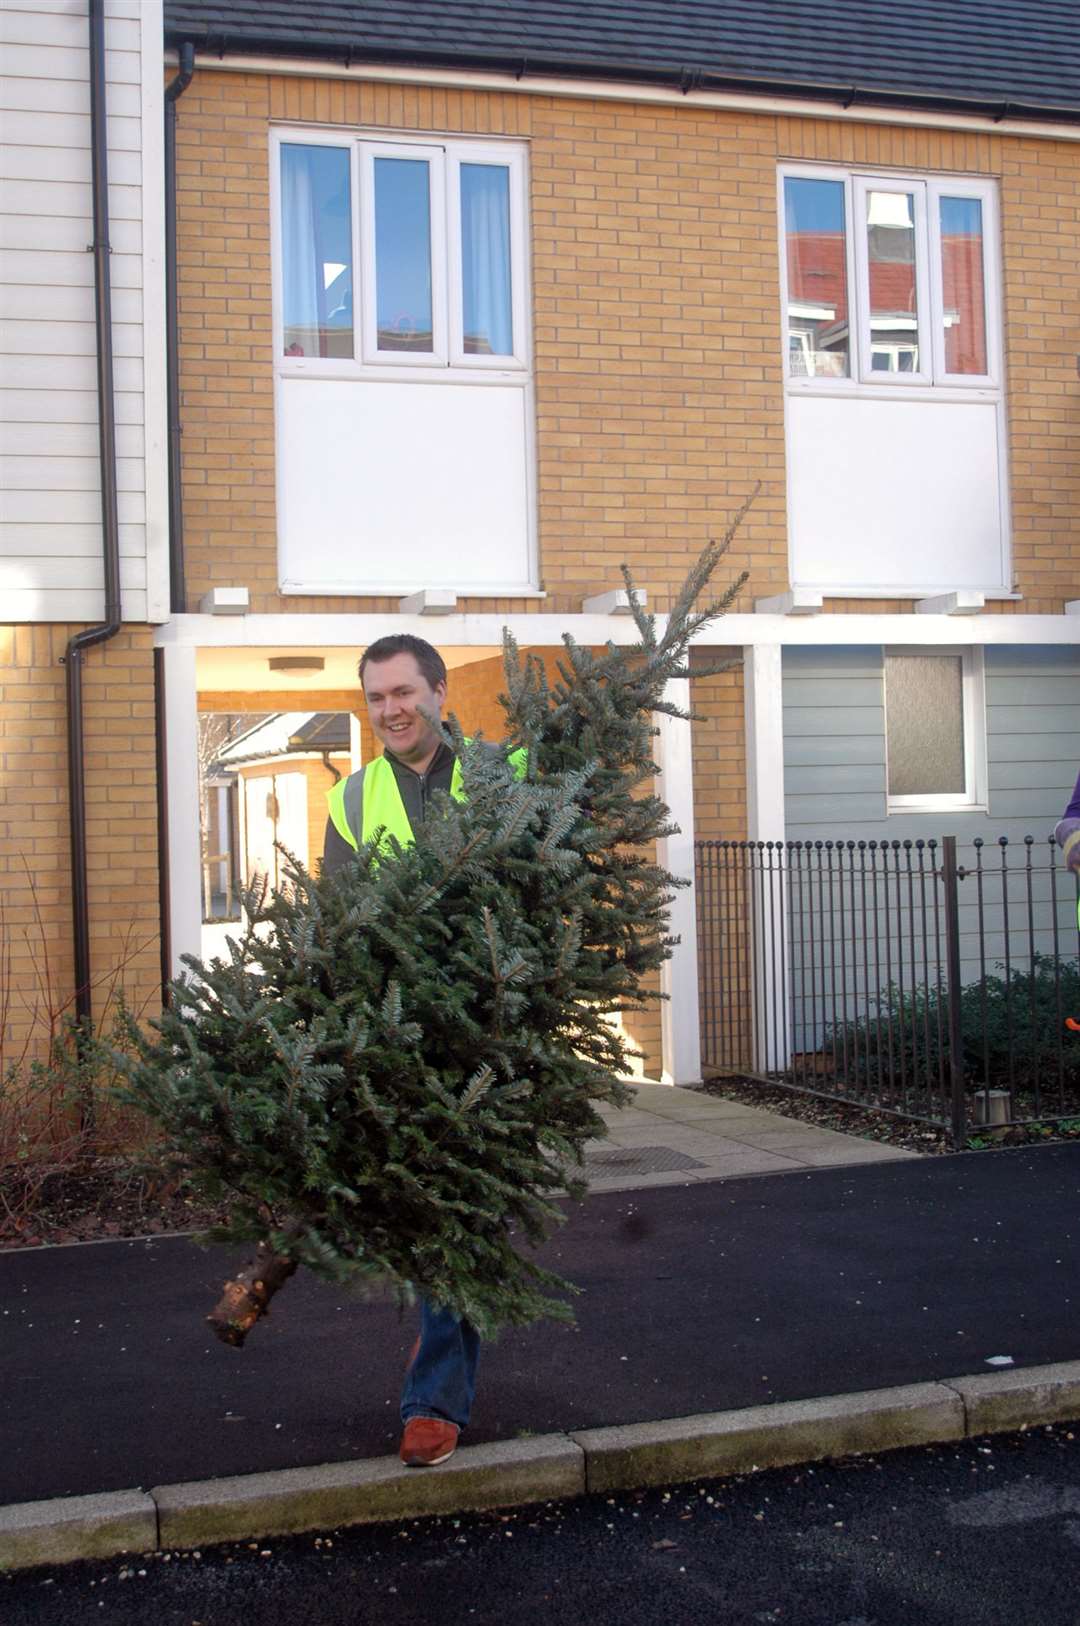 The deadline for the Pilgrims Hospices tree-cycling scheme is this weekend